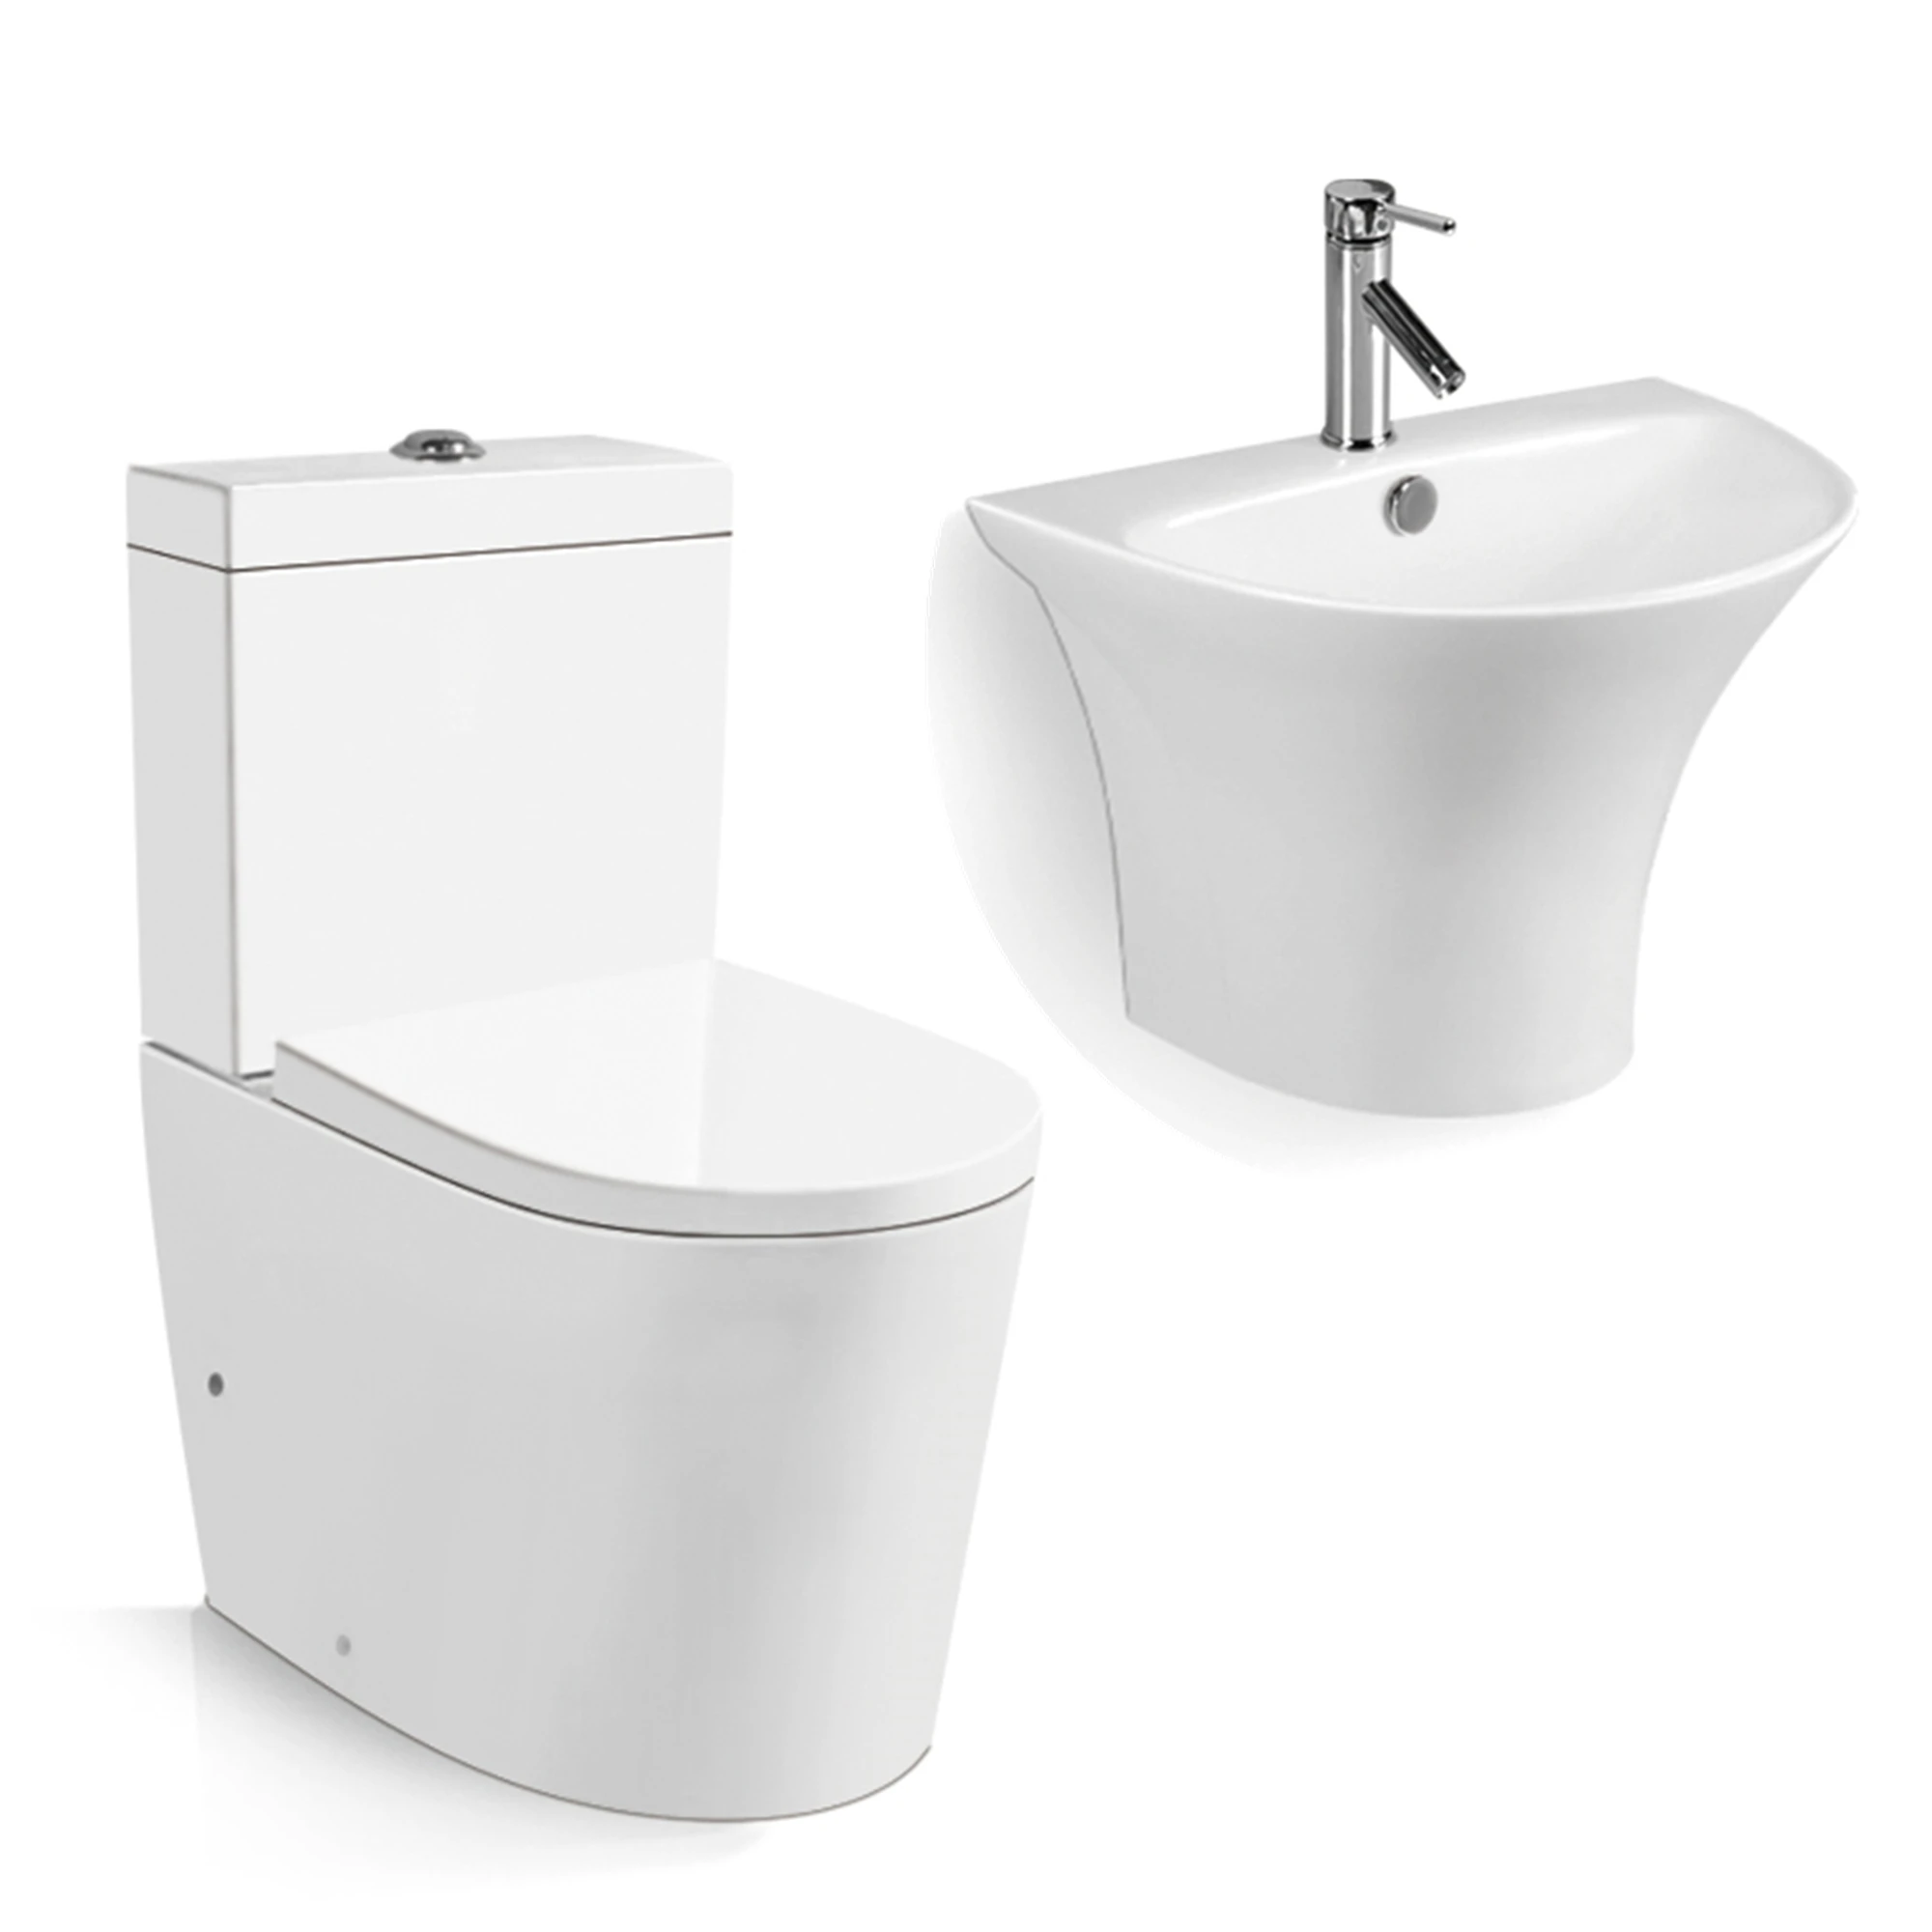 First E5201 Sanitary Ware Bathroom Ceramic Wc Piss Two Piece Toilet Set